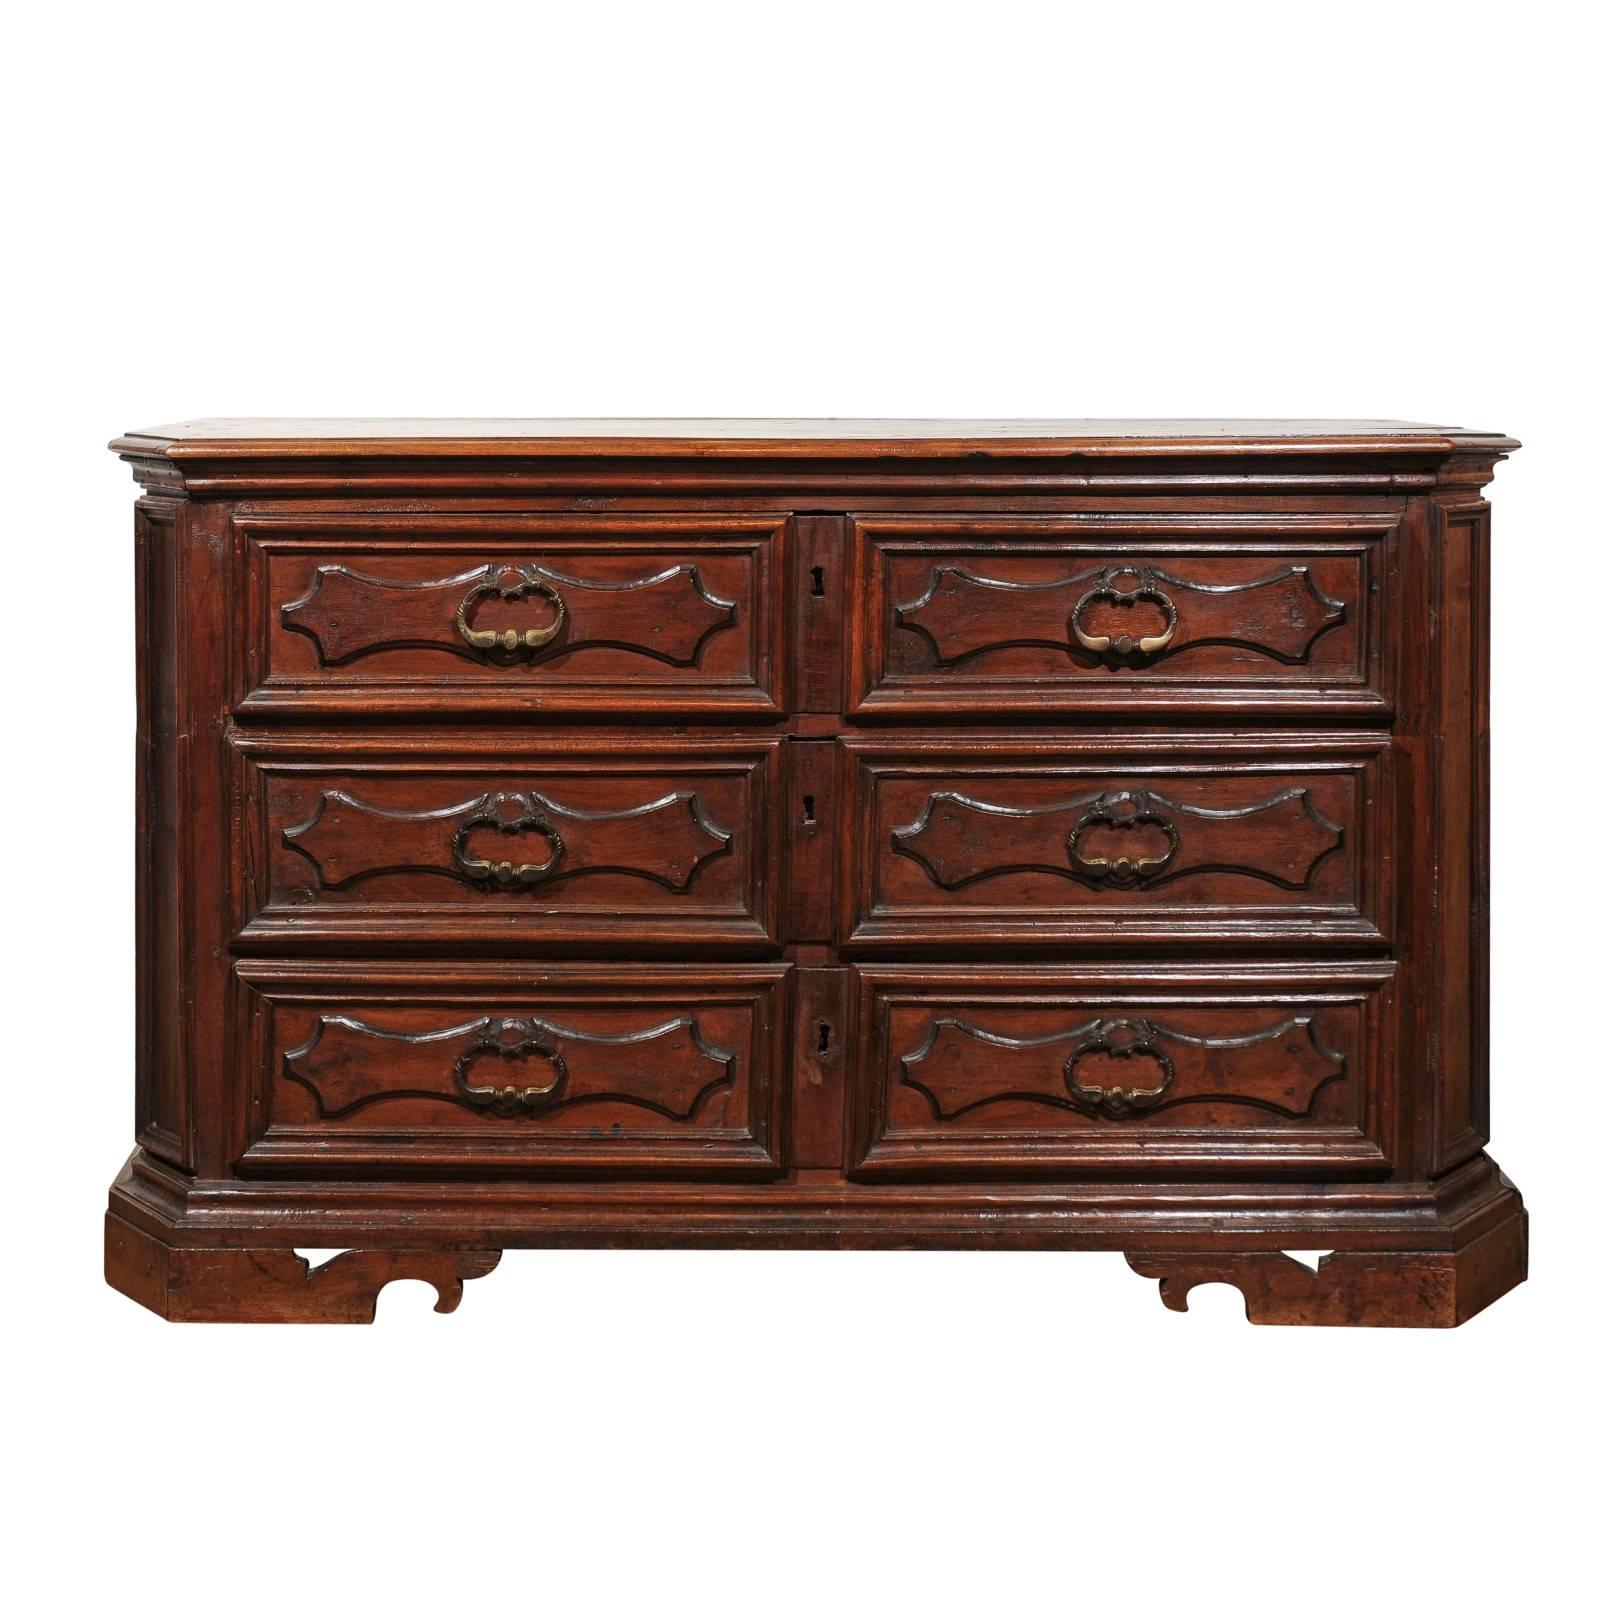 Italian 1850s Walnut Three-Drawer Commode with Cartouches and Diamond Motifs